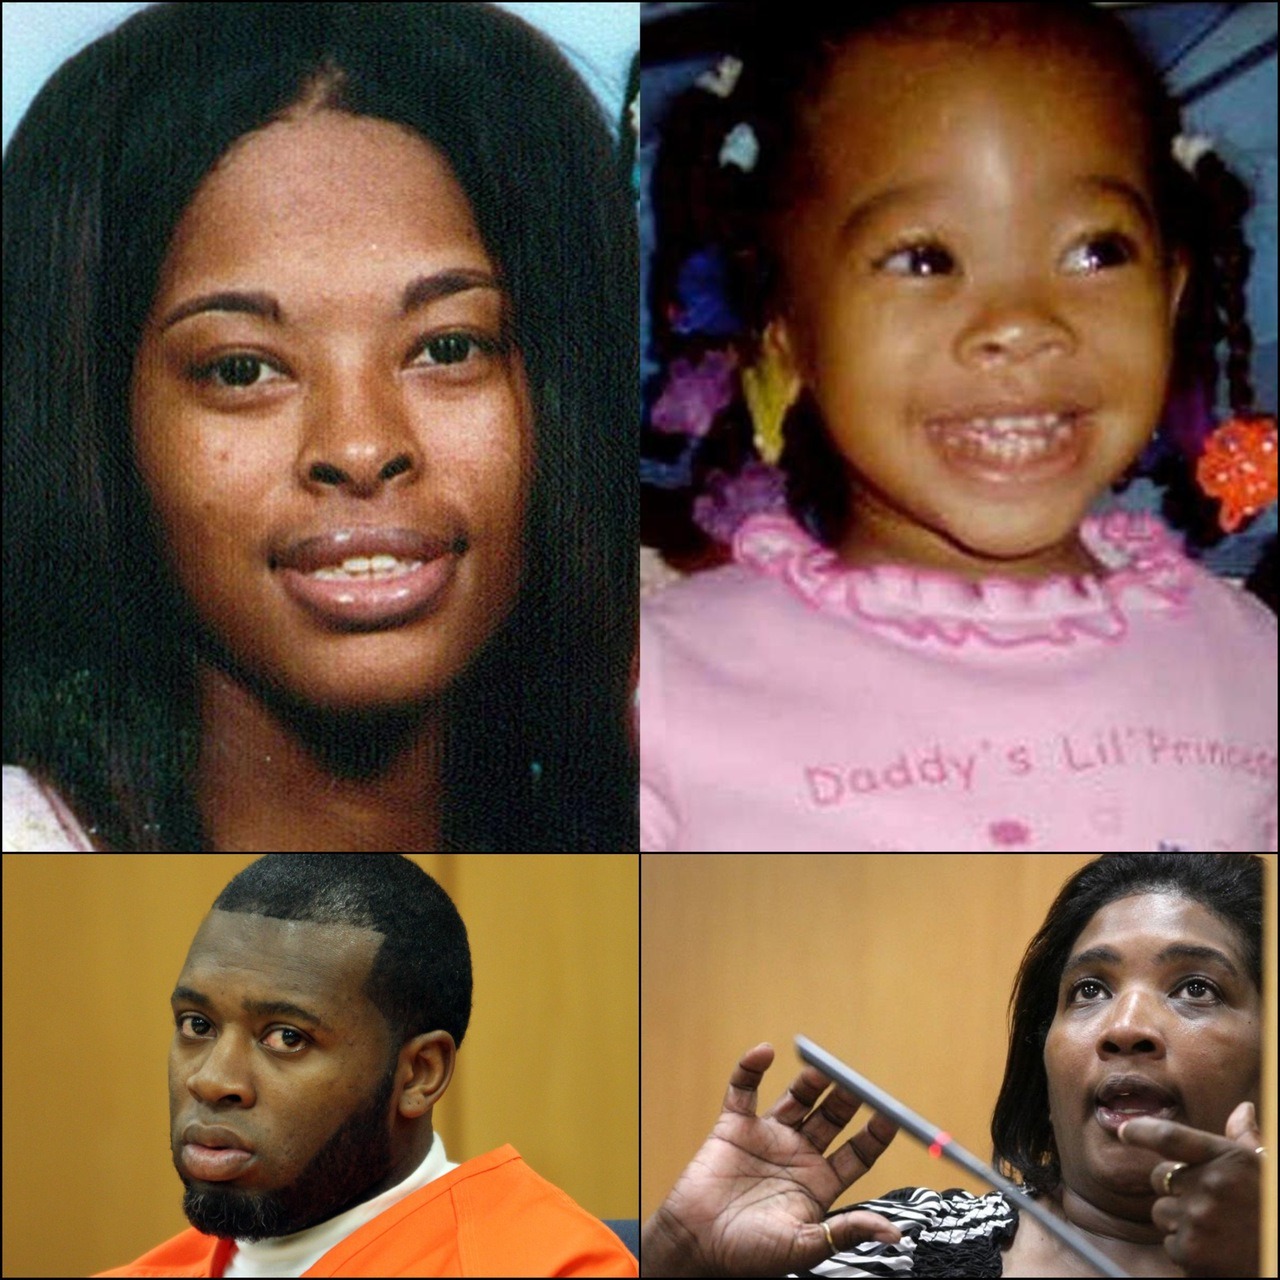 29 year-old Ronkeya Holmes (top left)  was murdered by the father of her child, Lester Ross (bottom left), on October 18th, 2009. Lester had custody of their 3 year-old daughter, MaSarah Ross (top right), and he lived in Haines City Florida with her...